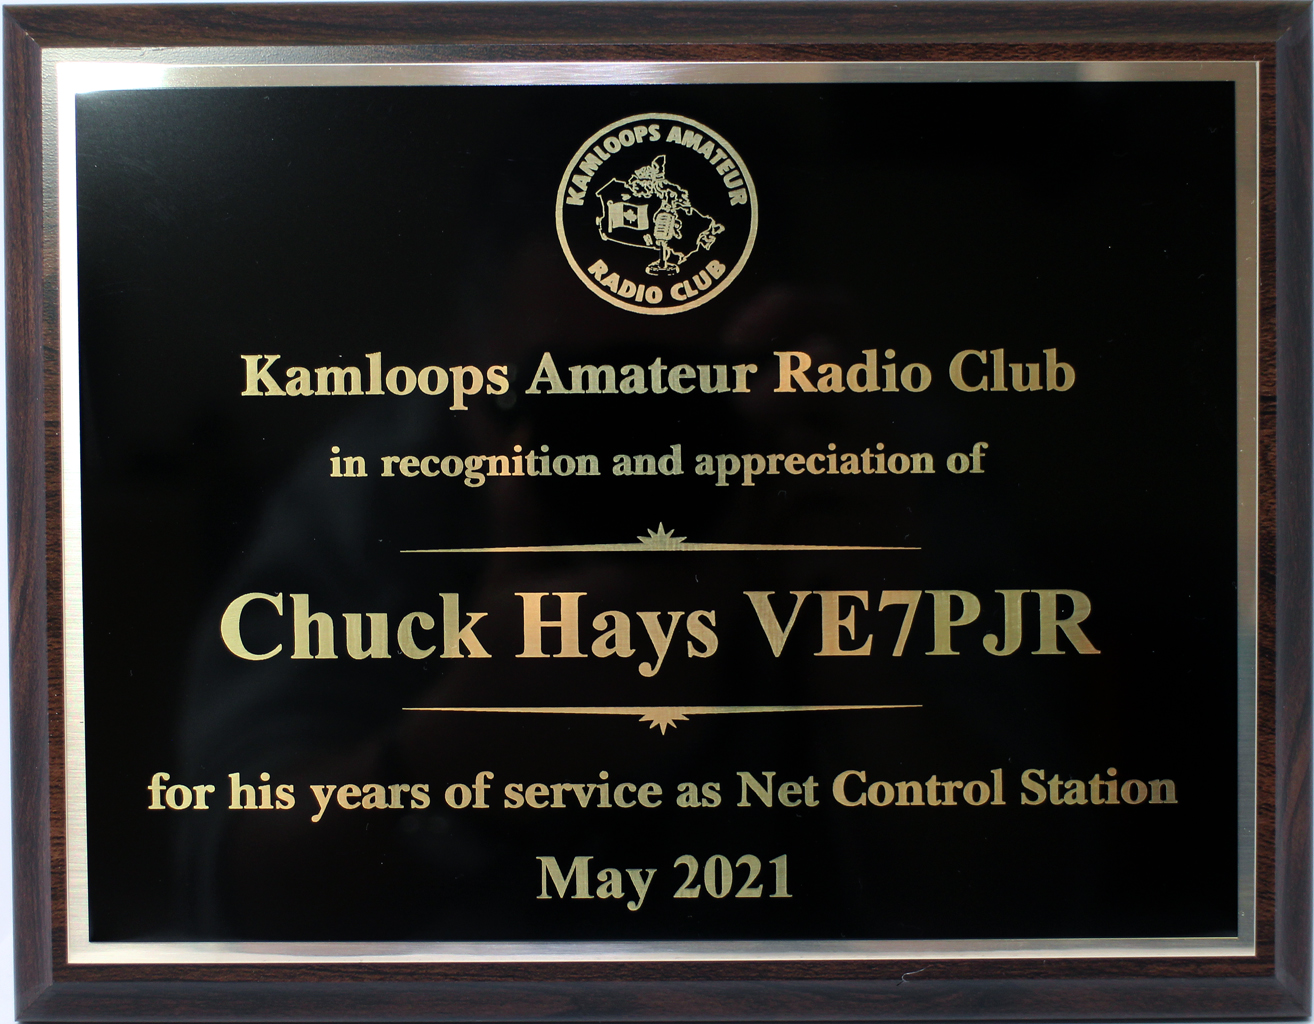 Appreciation Award presented to Chuck, VE7PJR for his service as Net Control